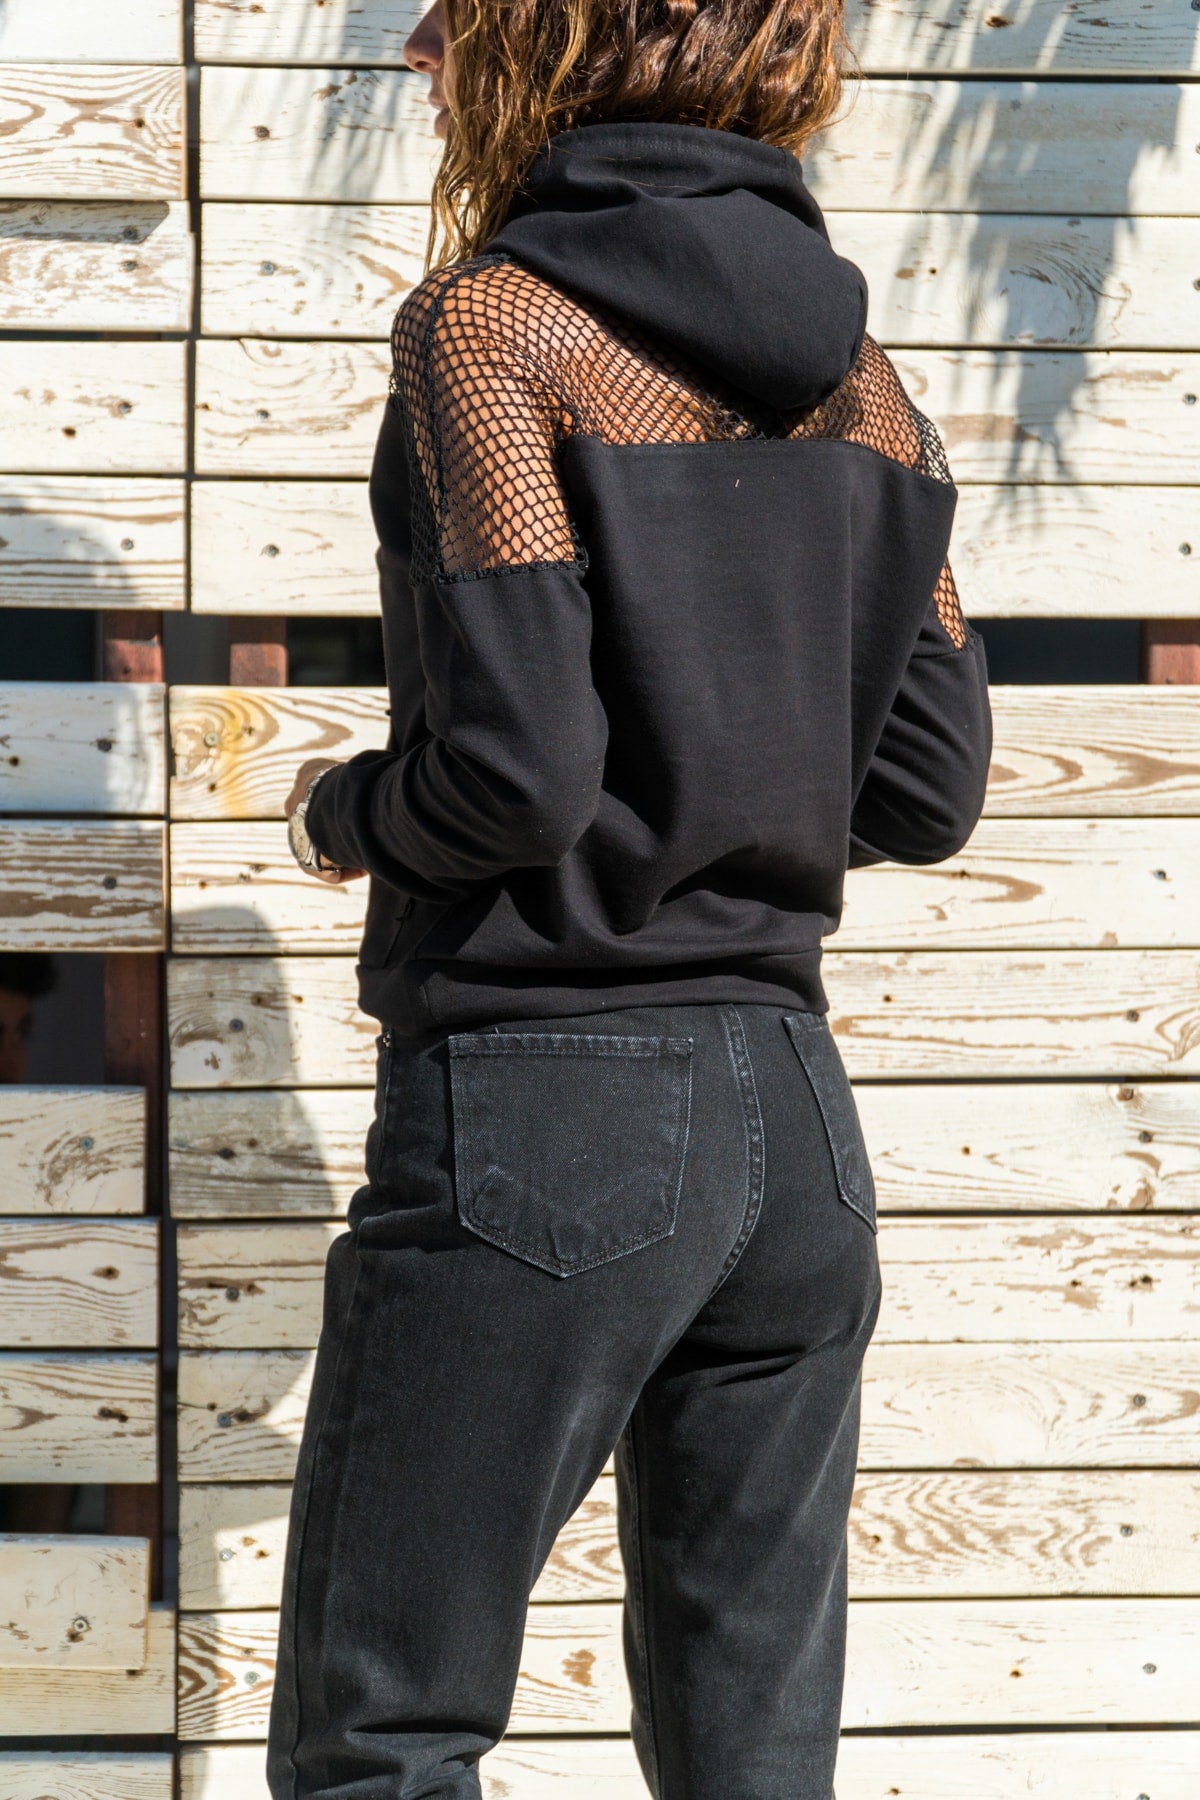 Black Women's Sweatshirt with Shoulder Detail - Hooded Neck, Long Sleeves, and Stylish Solid Design